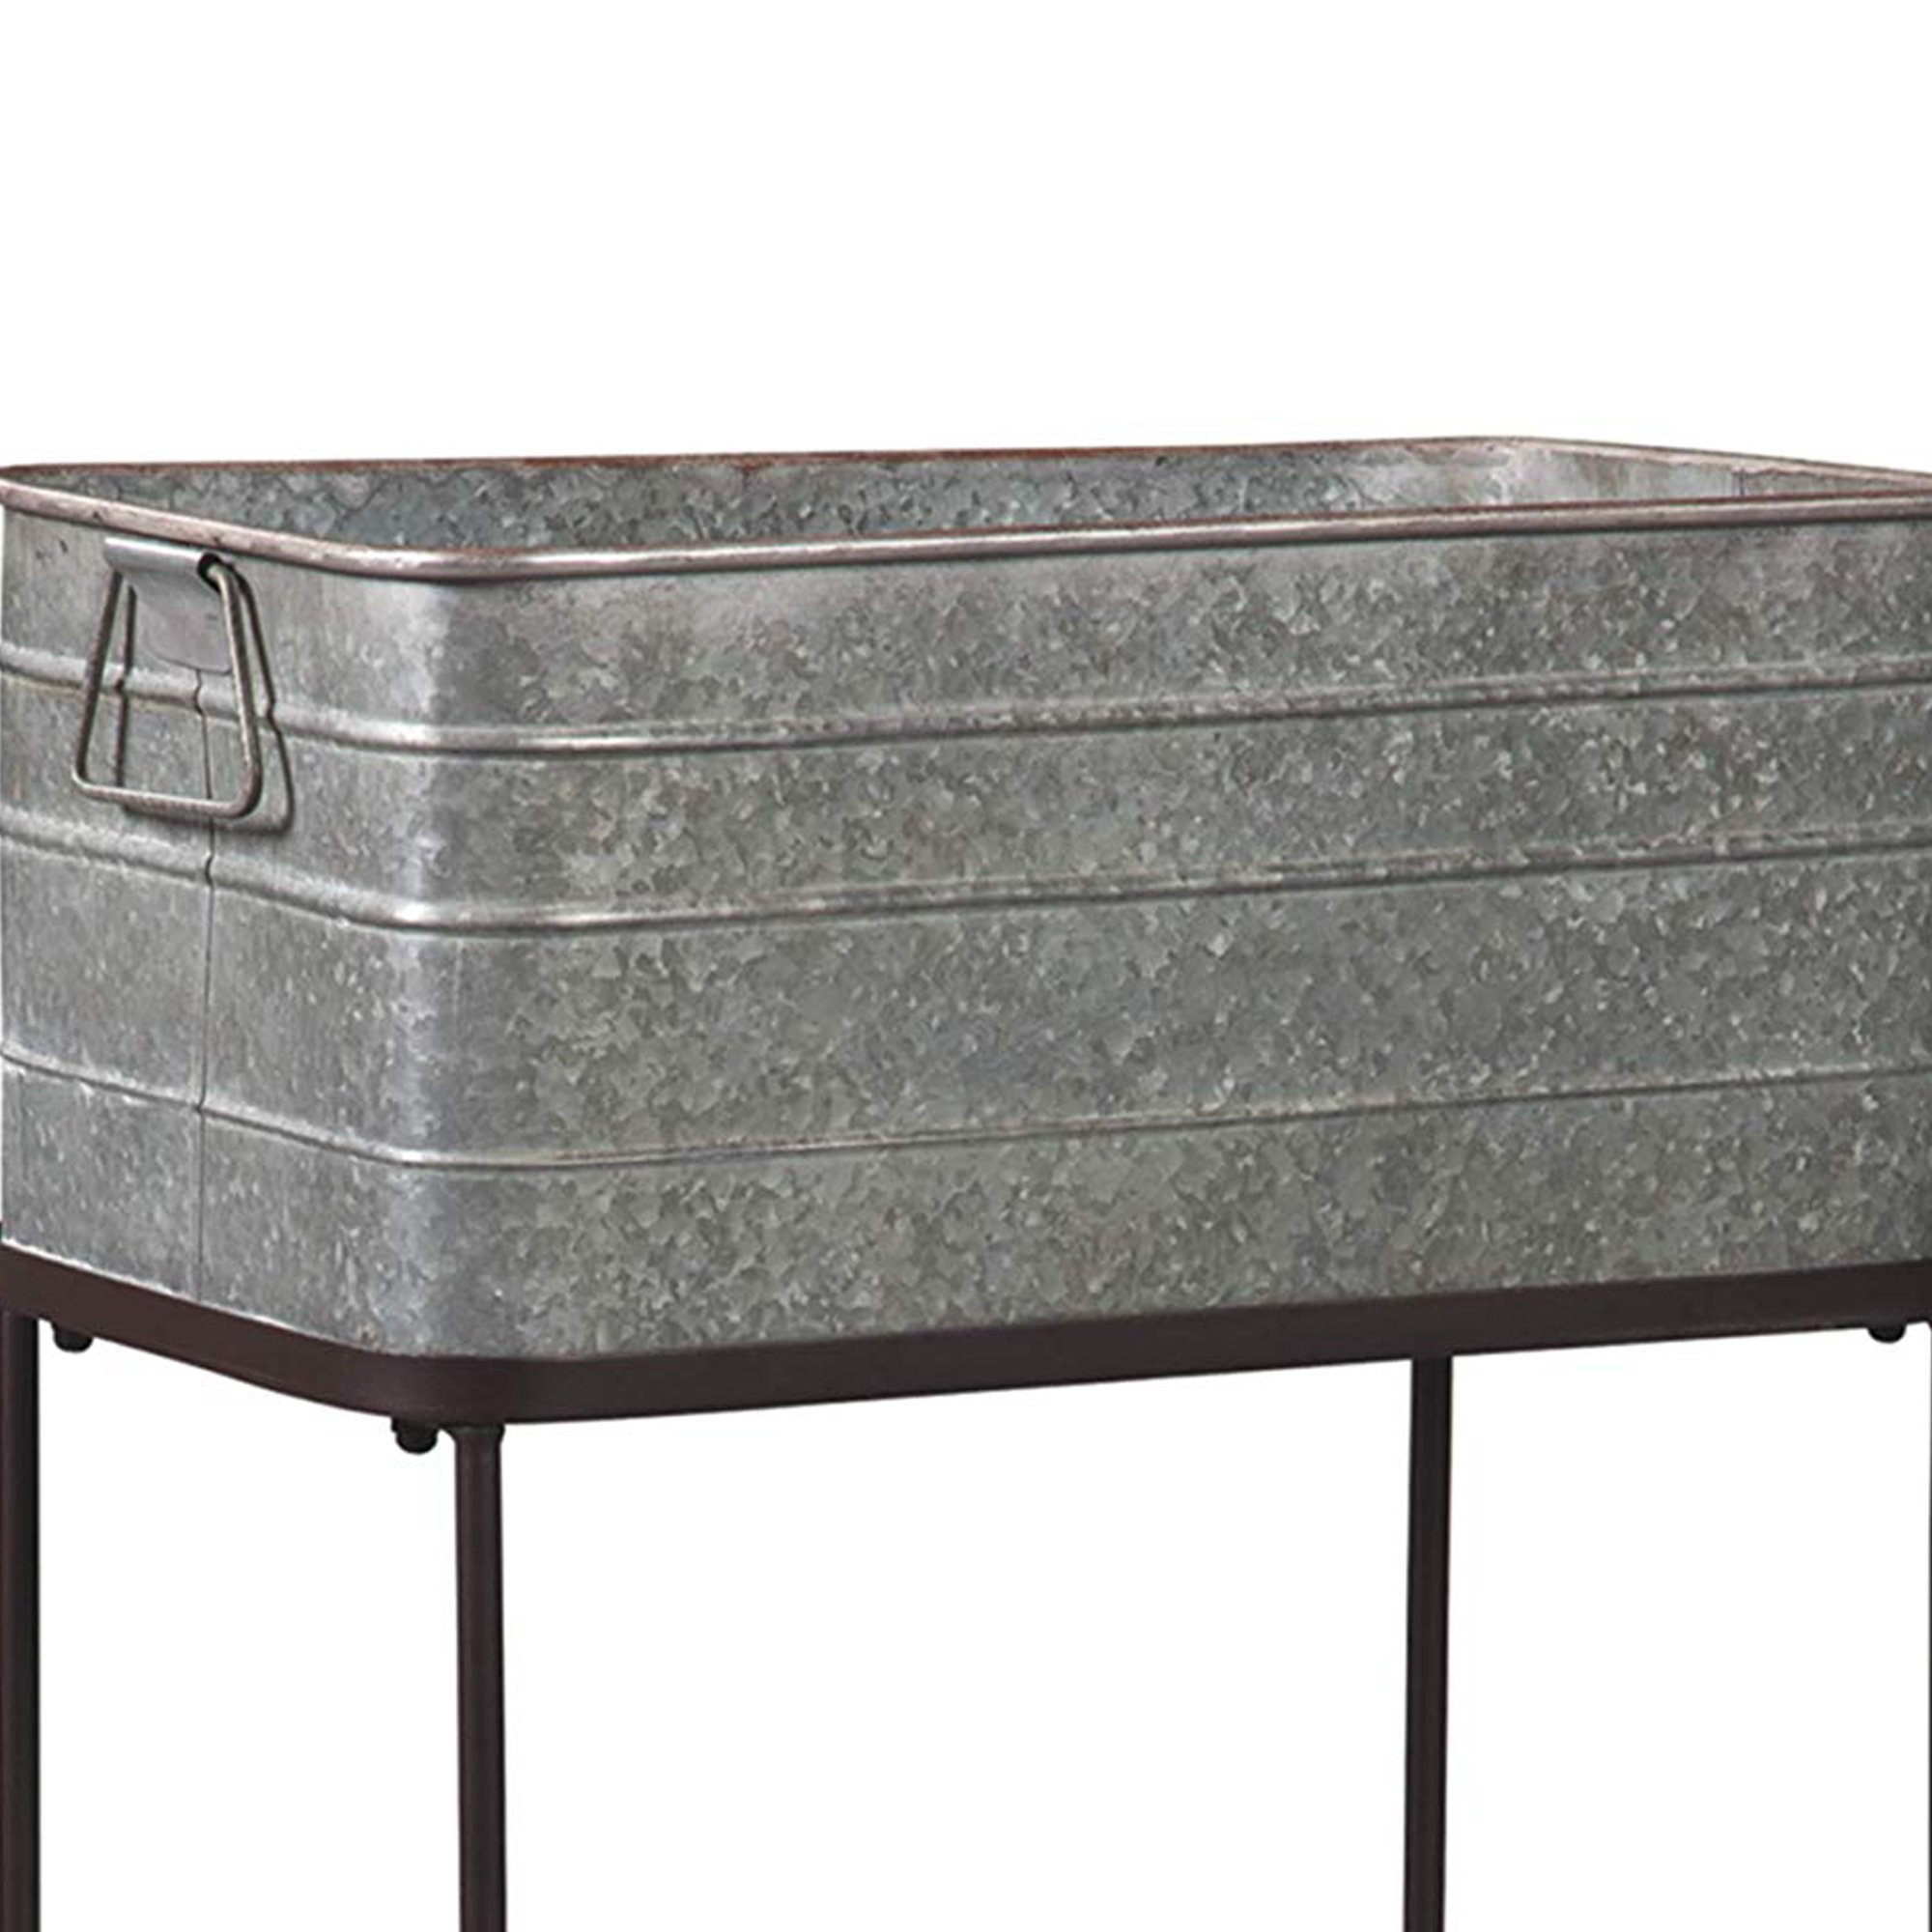 Rectangular Metal Beverage Tub With Stand And Open Grid Shelf, Gray And Black- Saltoro Sherpi